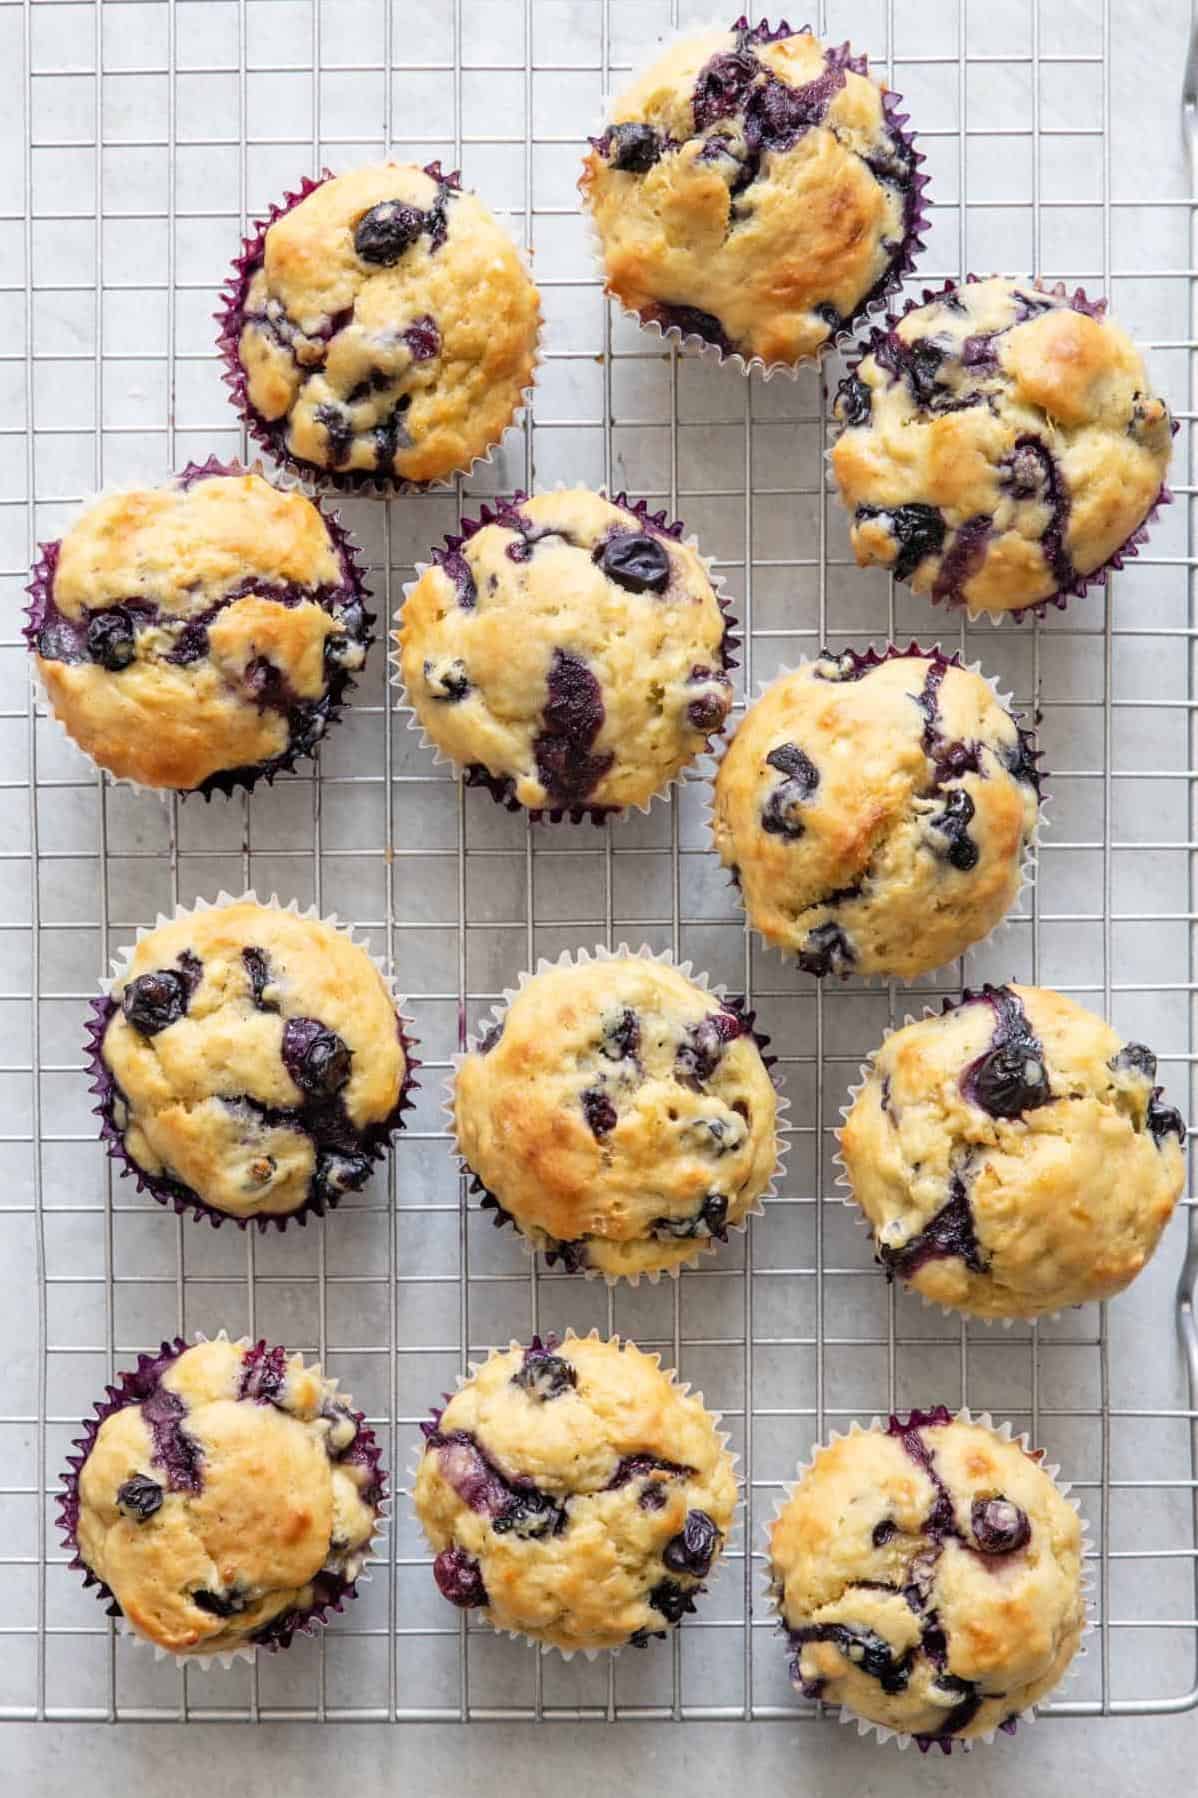   Melt-in-your-mouth goodness with every bite of these baked-to-perfection muffins.